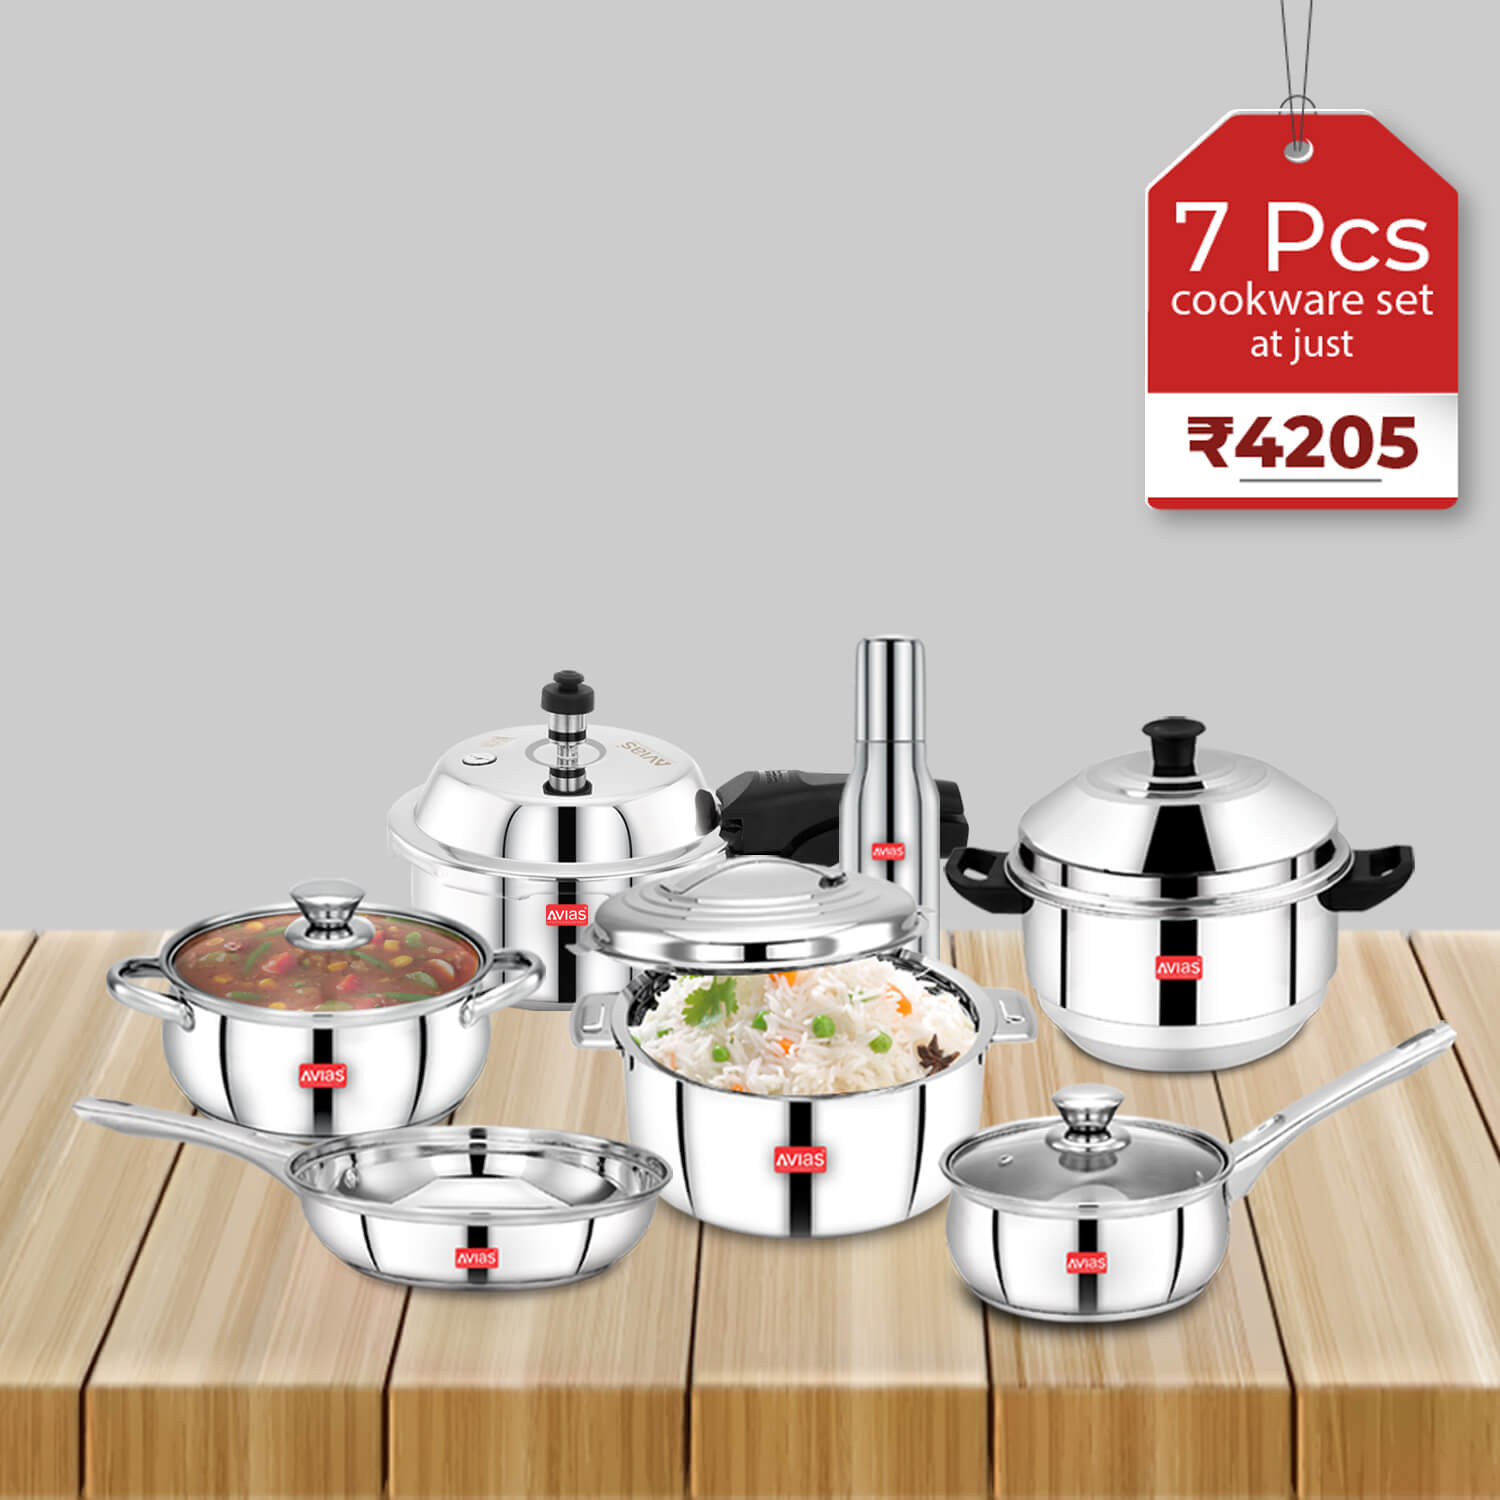 Avias Stainless Steel 7 PCS Kitchen set | Standard | High grade and Premium quality